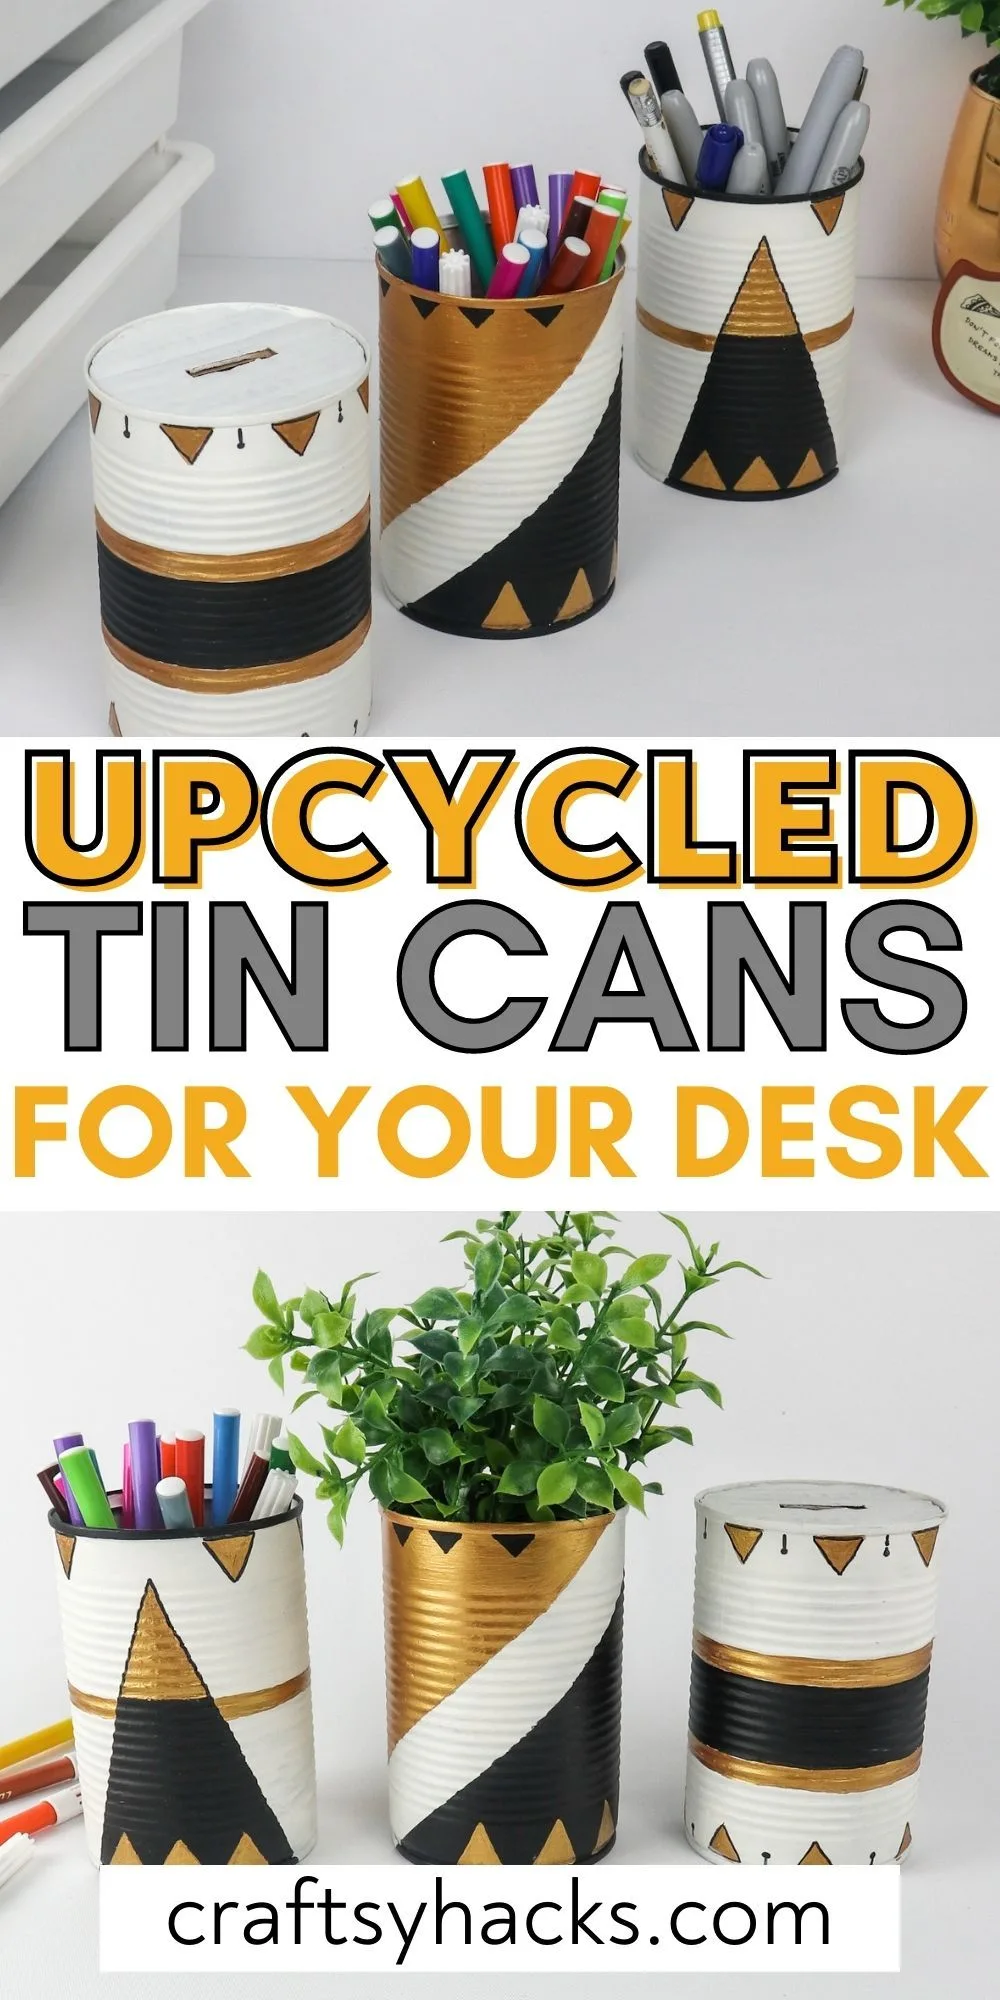 upcycled tin cans for your desk